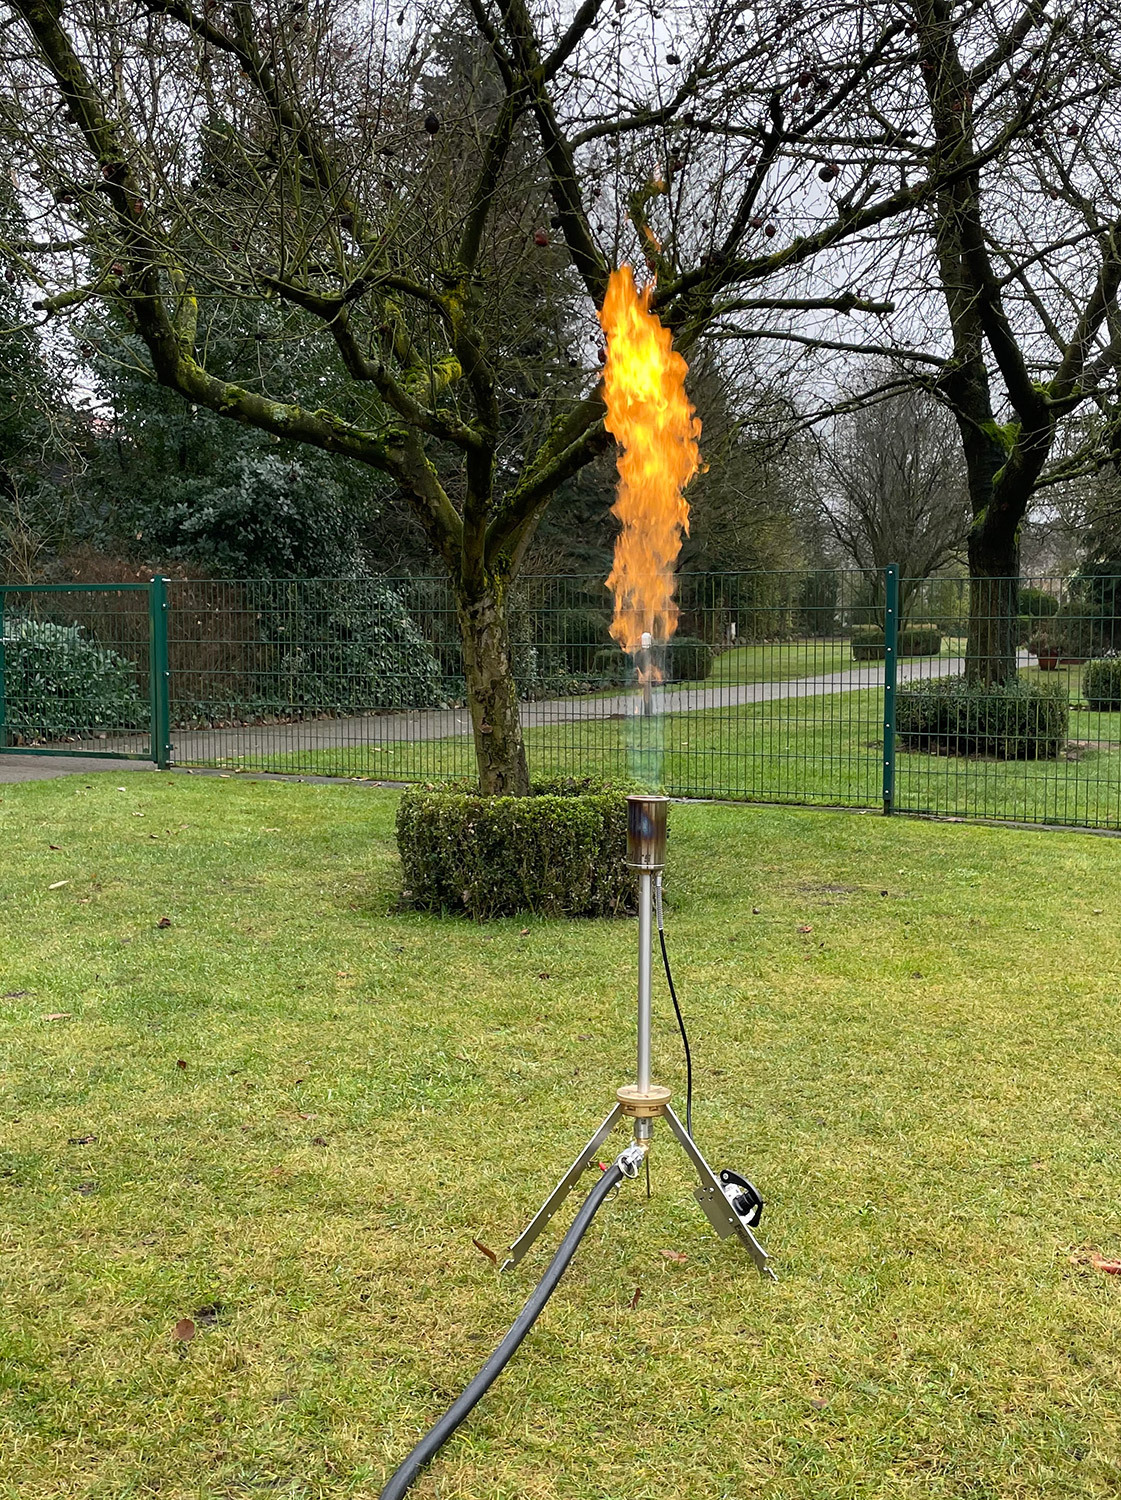 Our Mobile Gas Flare S in action